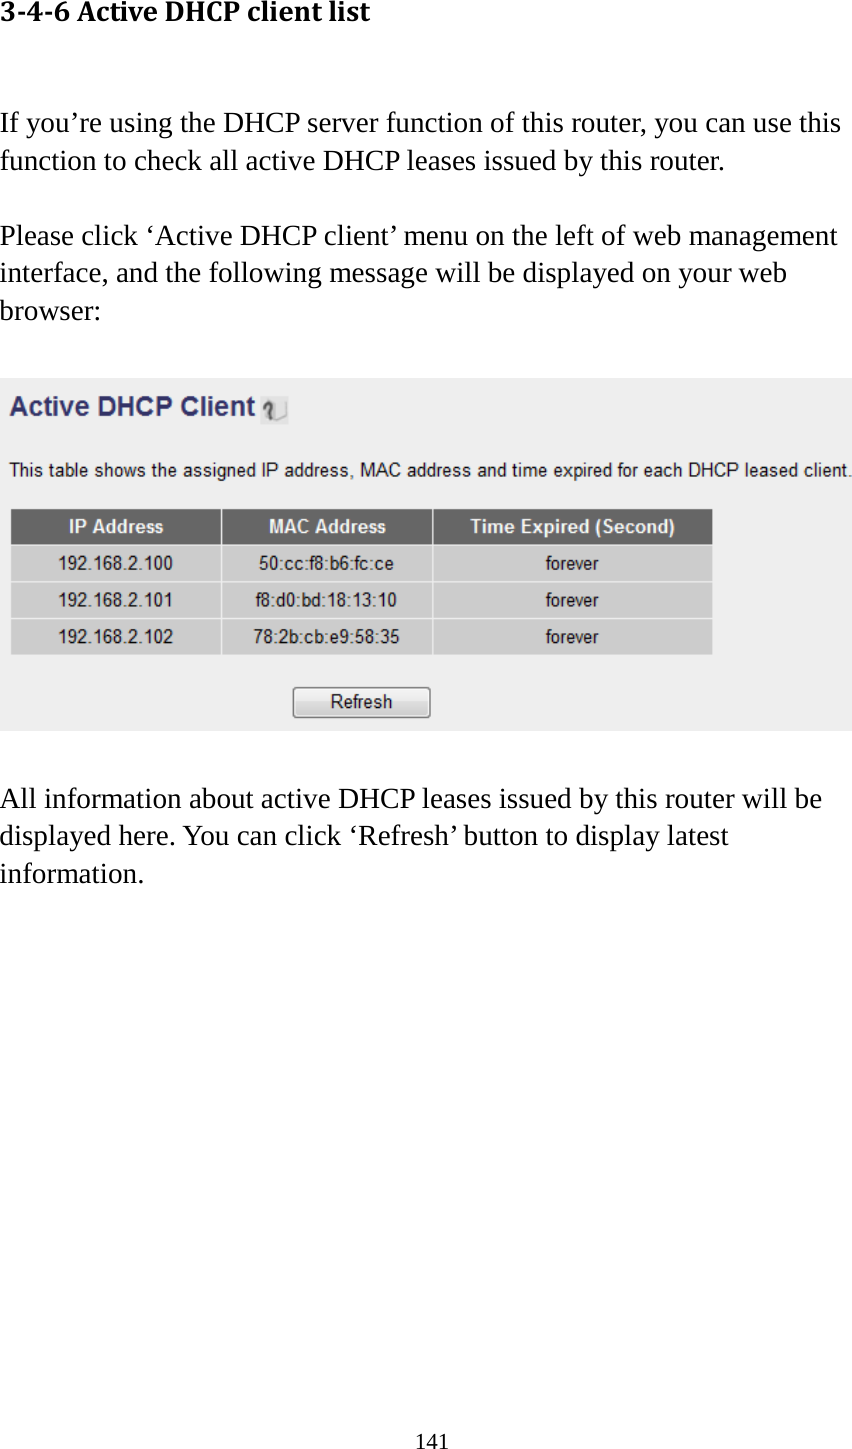 141 3-4-6 Active DHCP client list  If you’re using the DHCP server function of this router, you can use this function to check all active DHCP leases issued by this router.  Please click ‘Active DHCP client’ menu on the left of web management interface, and the following message will be displayed on your web browser:    All information about active DHCP leases issued by this router will be displayed here. You can click ‘Refresh’ button to display latest information.              